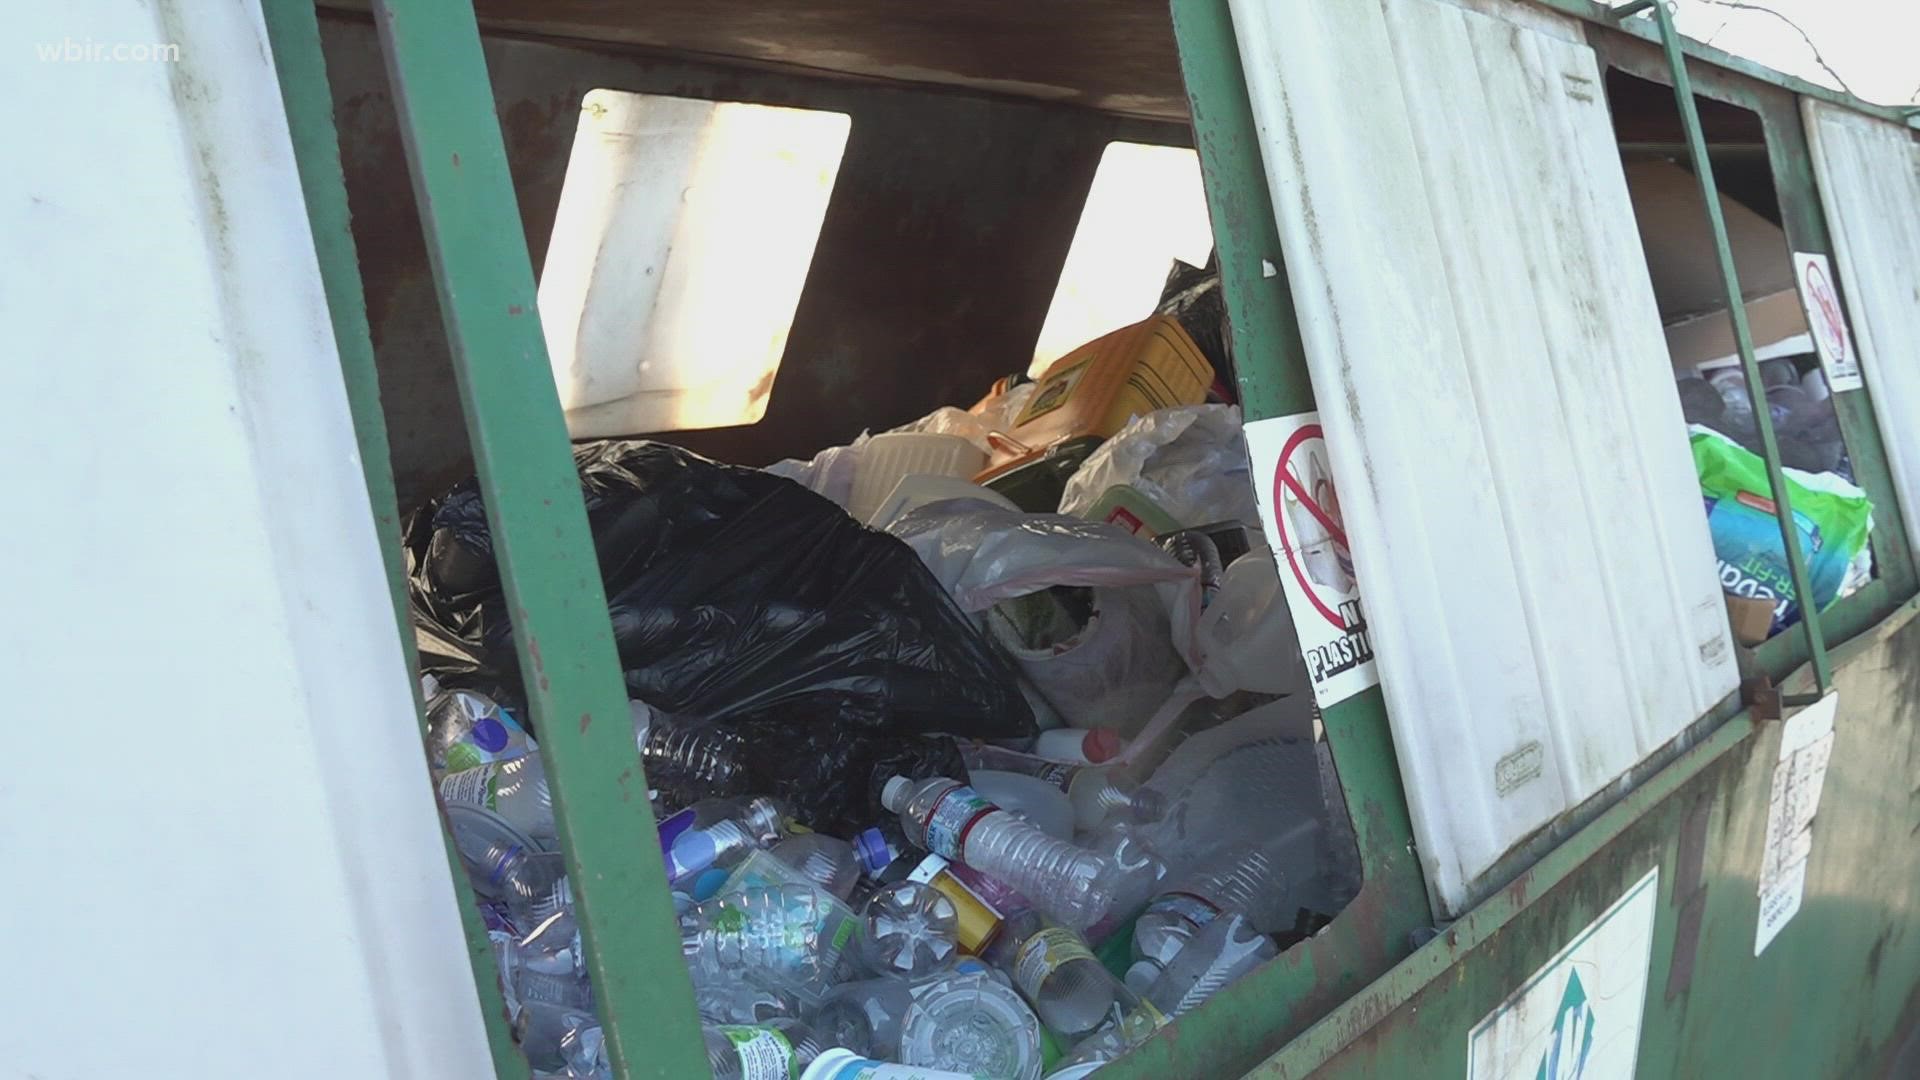 There isn't a clear answer for Knoxville because a formal audit of the program was put off. In Nashville, it's estimated 28% of recycling ends up in the trash.